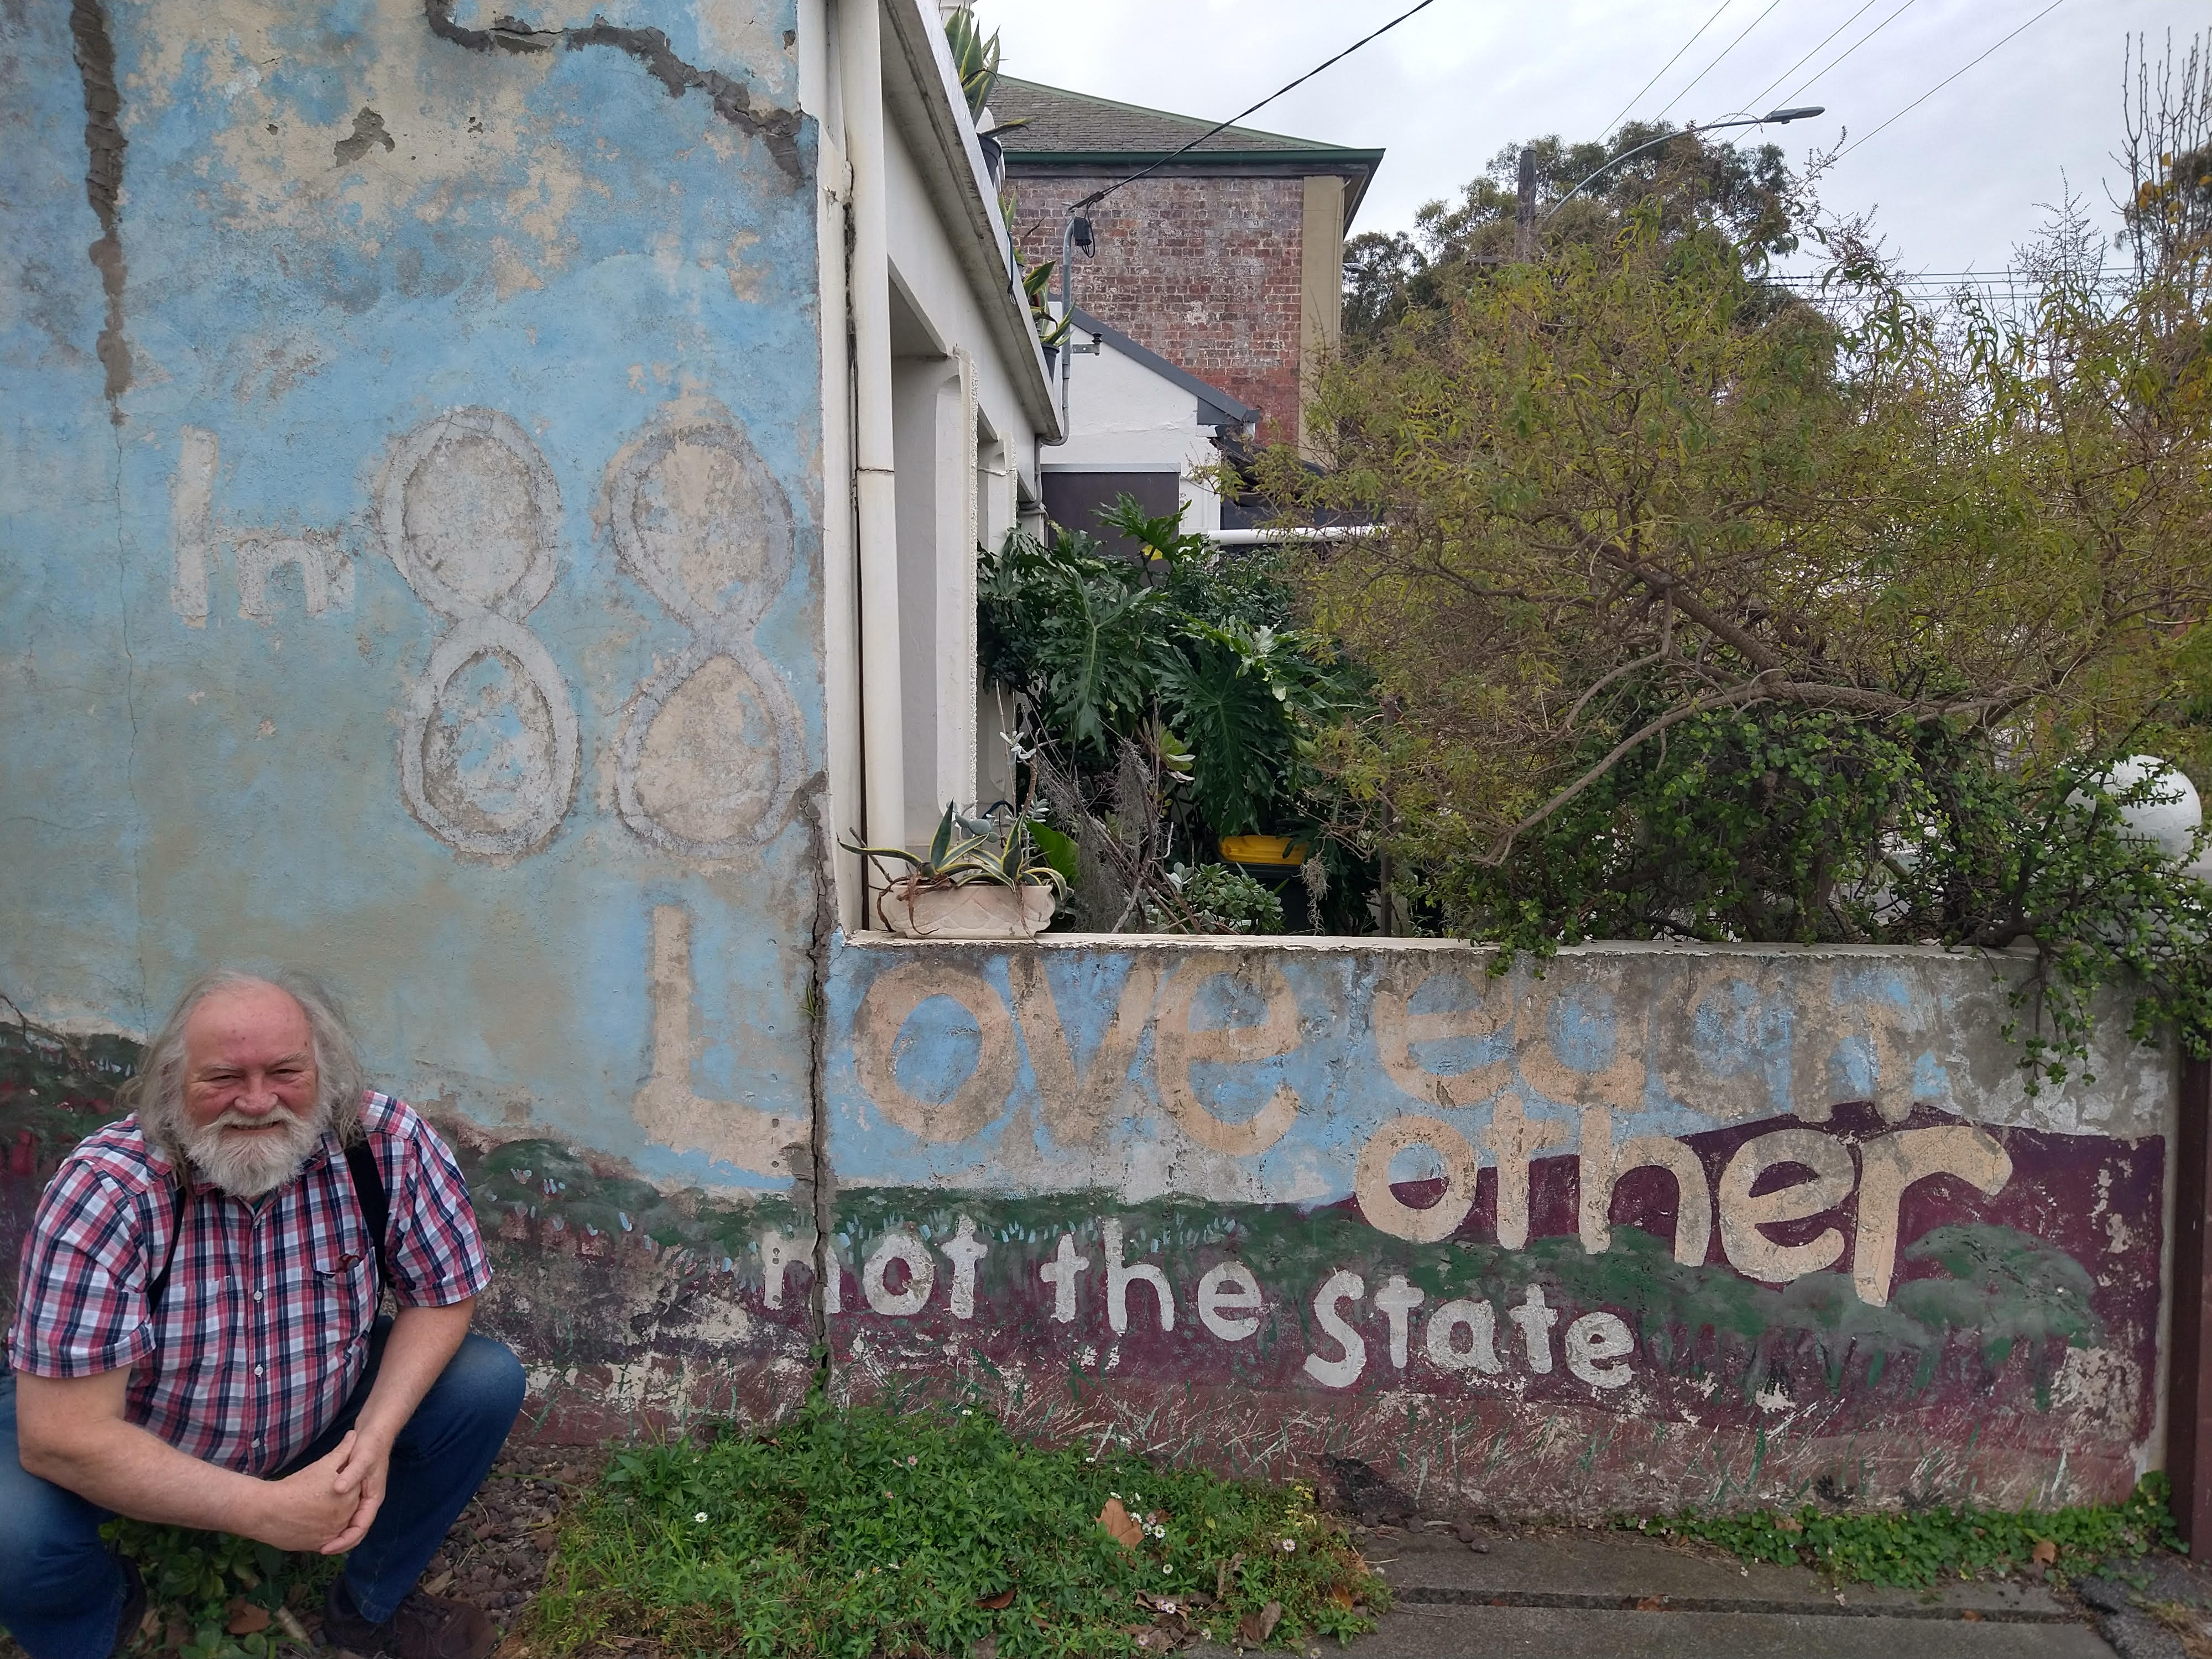 Don crouches down in front of a garden wall which reads 'In 88 love each other not the state'